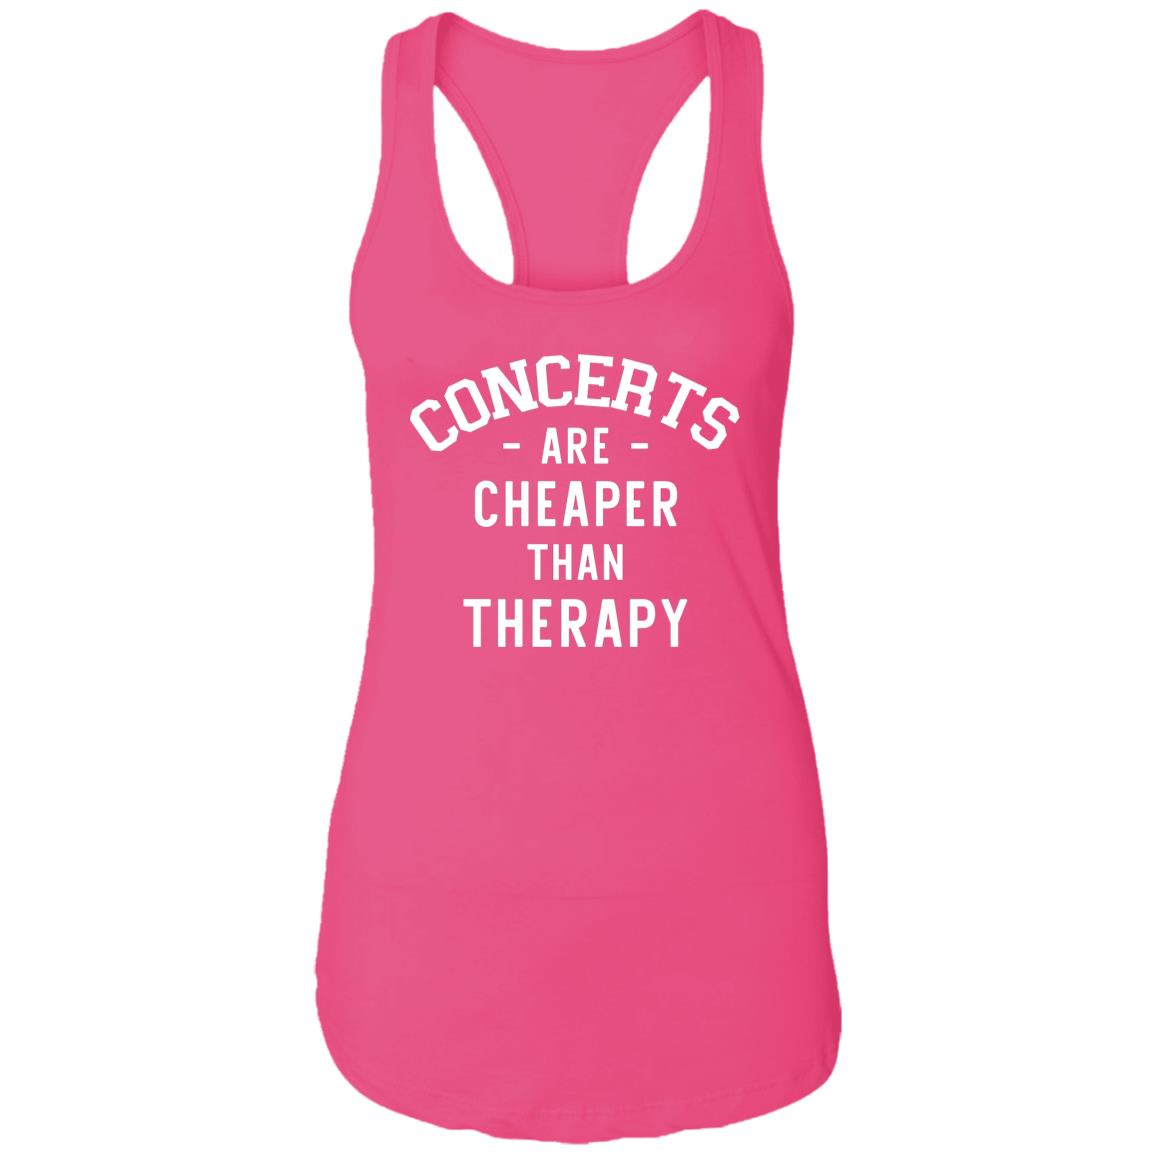 Concerts Are Cheaper Than Therapy Racerback Tank | Funny Concert Tank Top